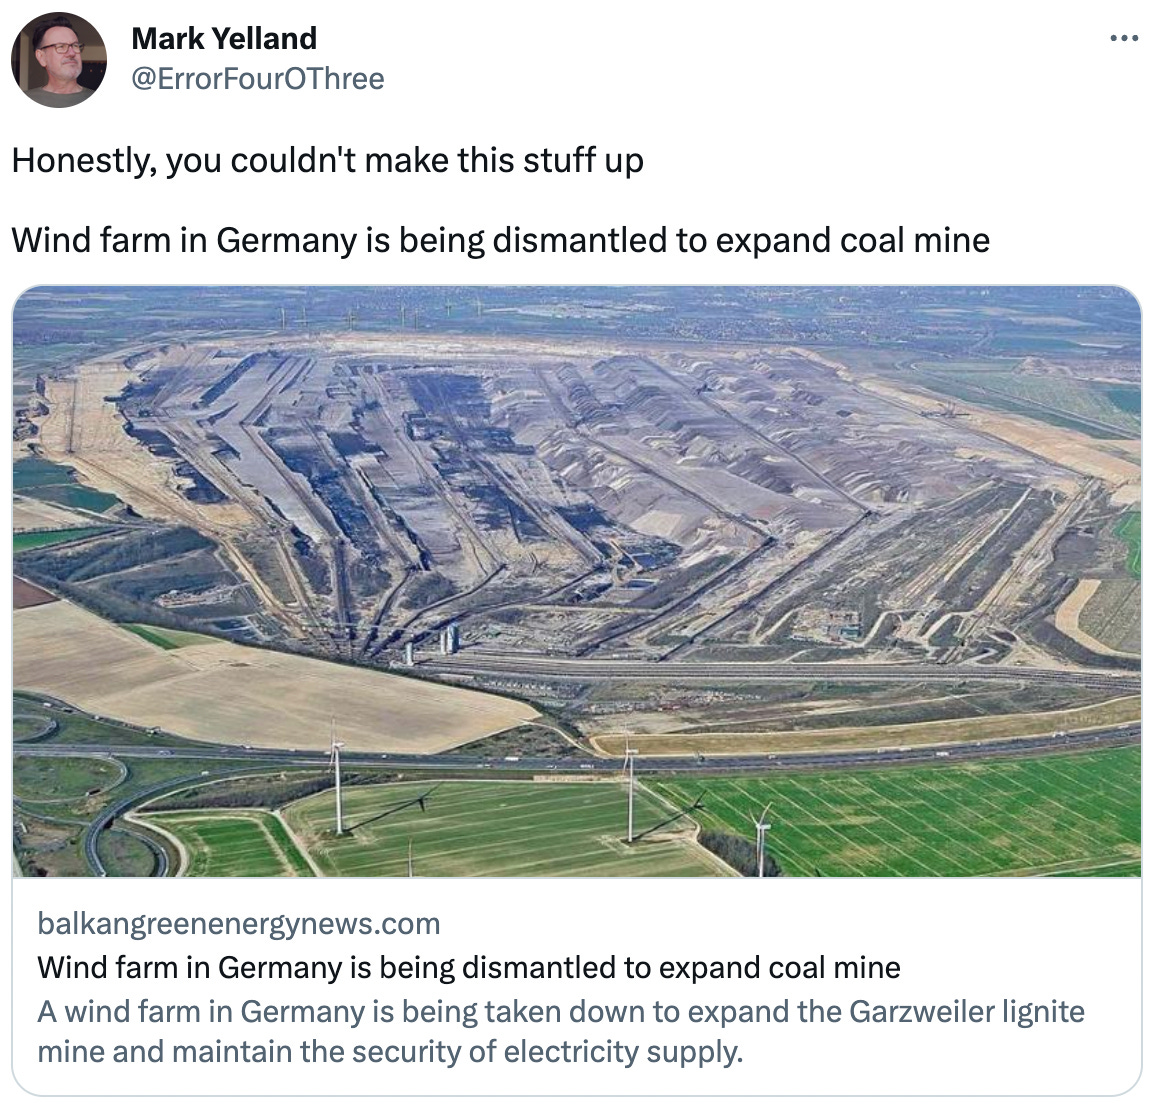  Mark Yelland @ErrorFourOThree Honestly, you couldn't make this stuff up  Wind farm in Germany is being dismantled to expand coal mine balkangreenenergynews.com Wind farm in Germany is being dismantled to expand coal mine A wind farm in Germany is being taken down to expand the Garzweiler lignite mine and maintain the security of electricity supply.